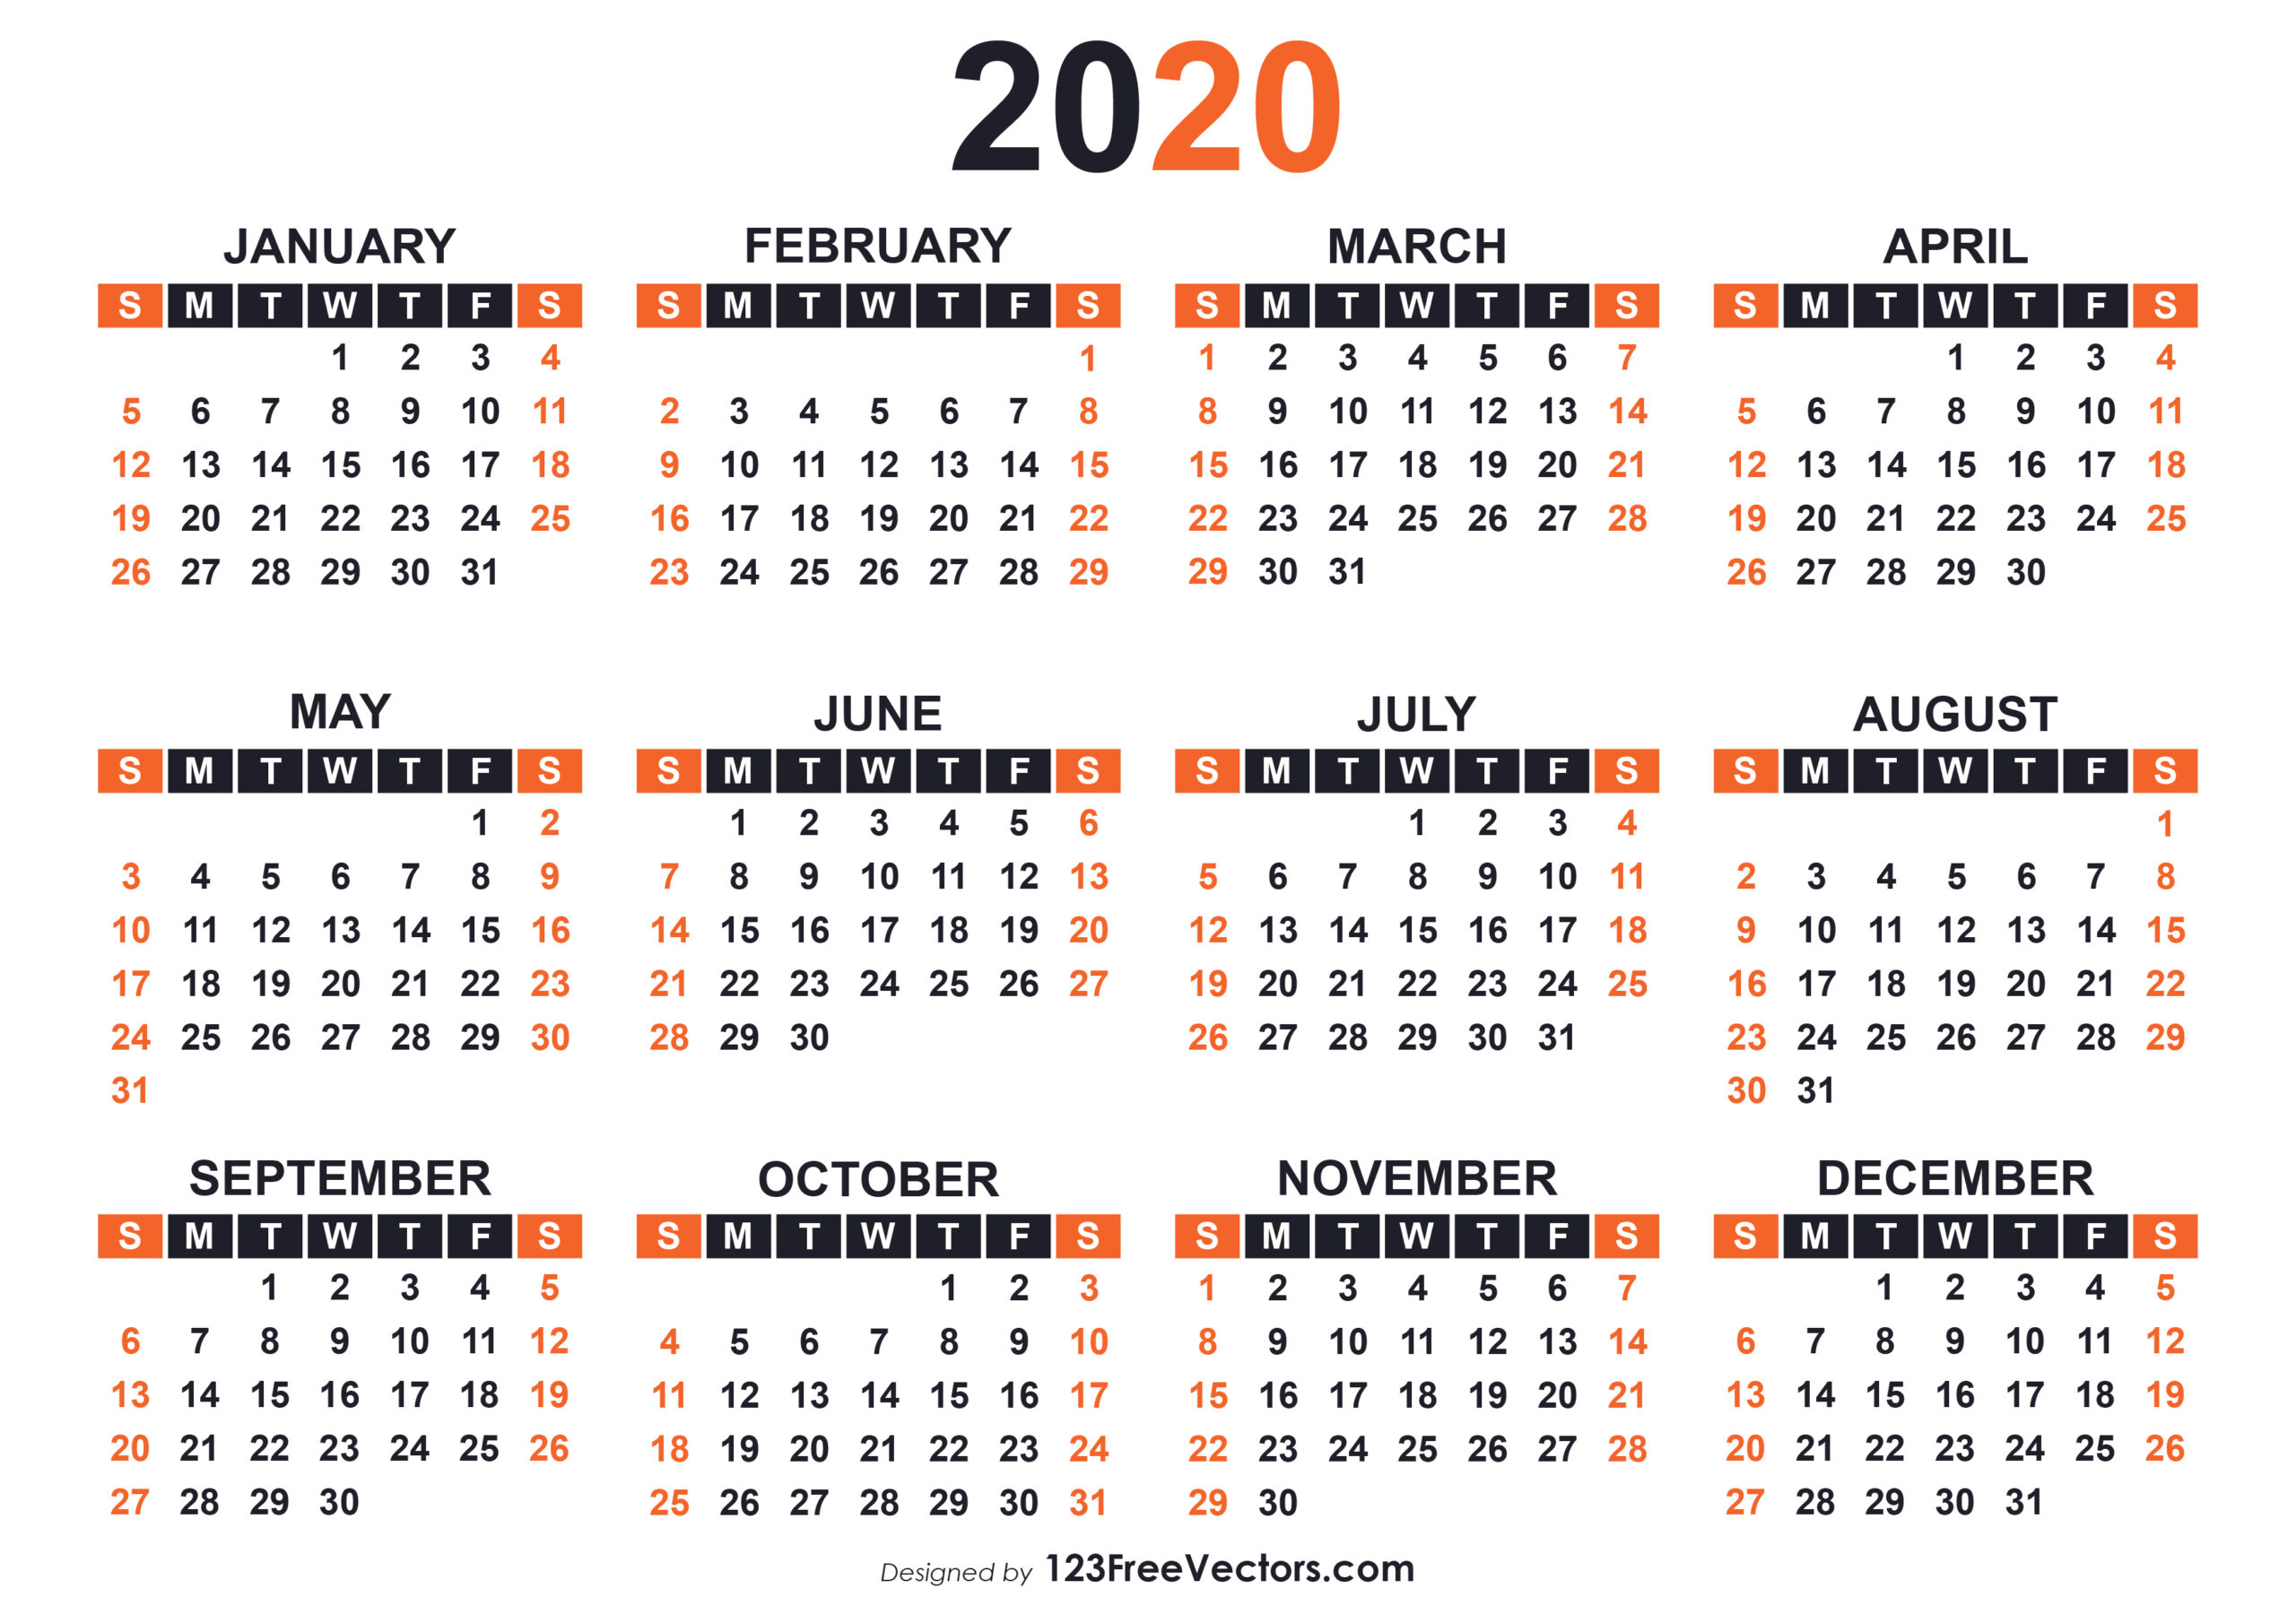 2020 Print Free Calendars Without Downloading | Calendar